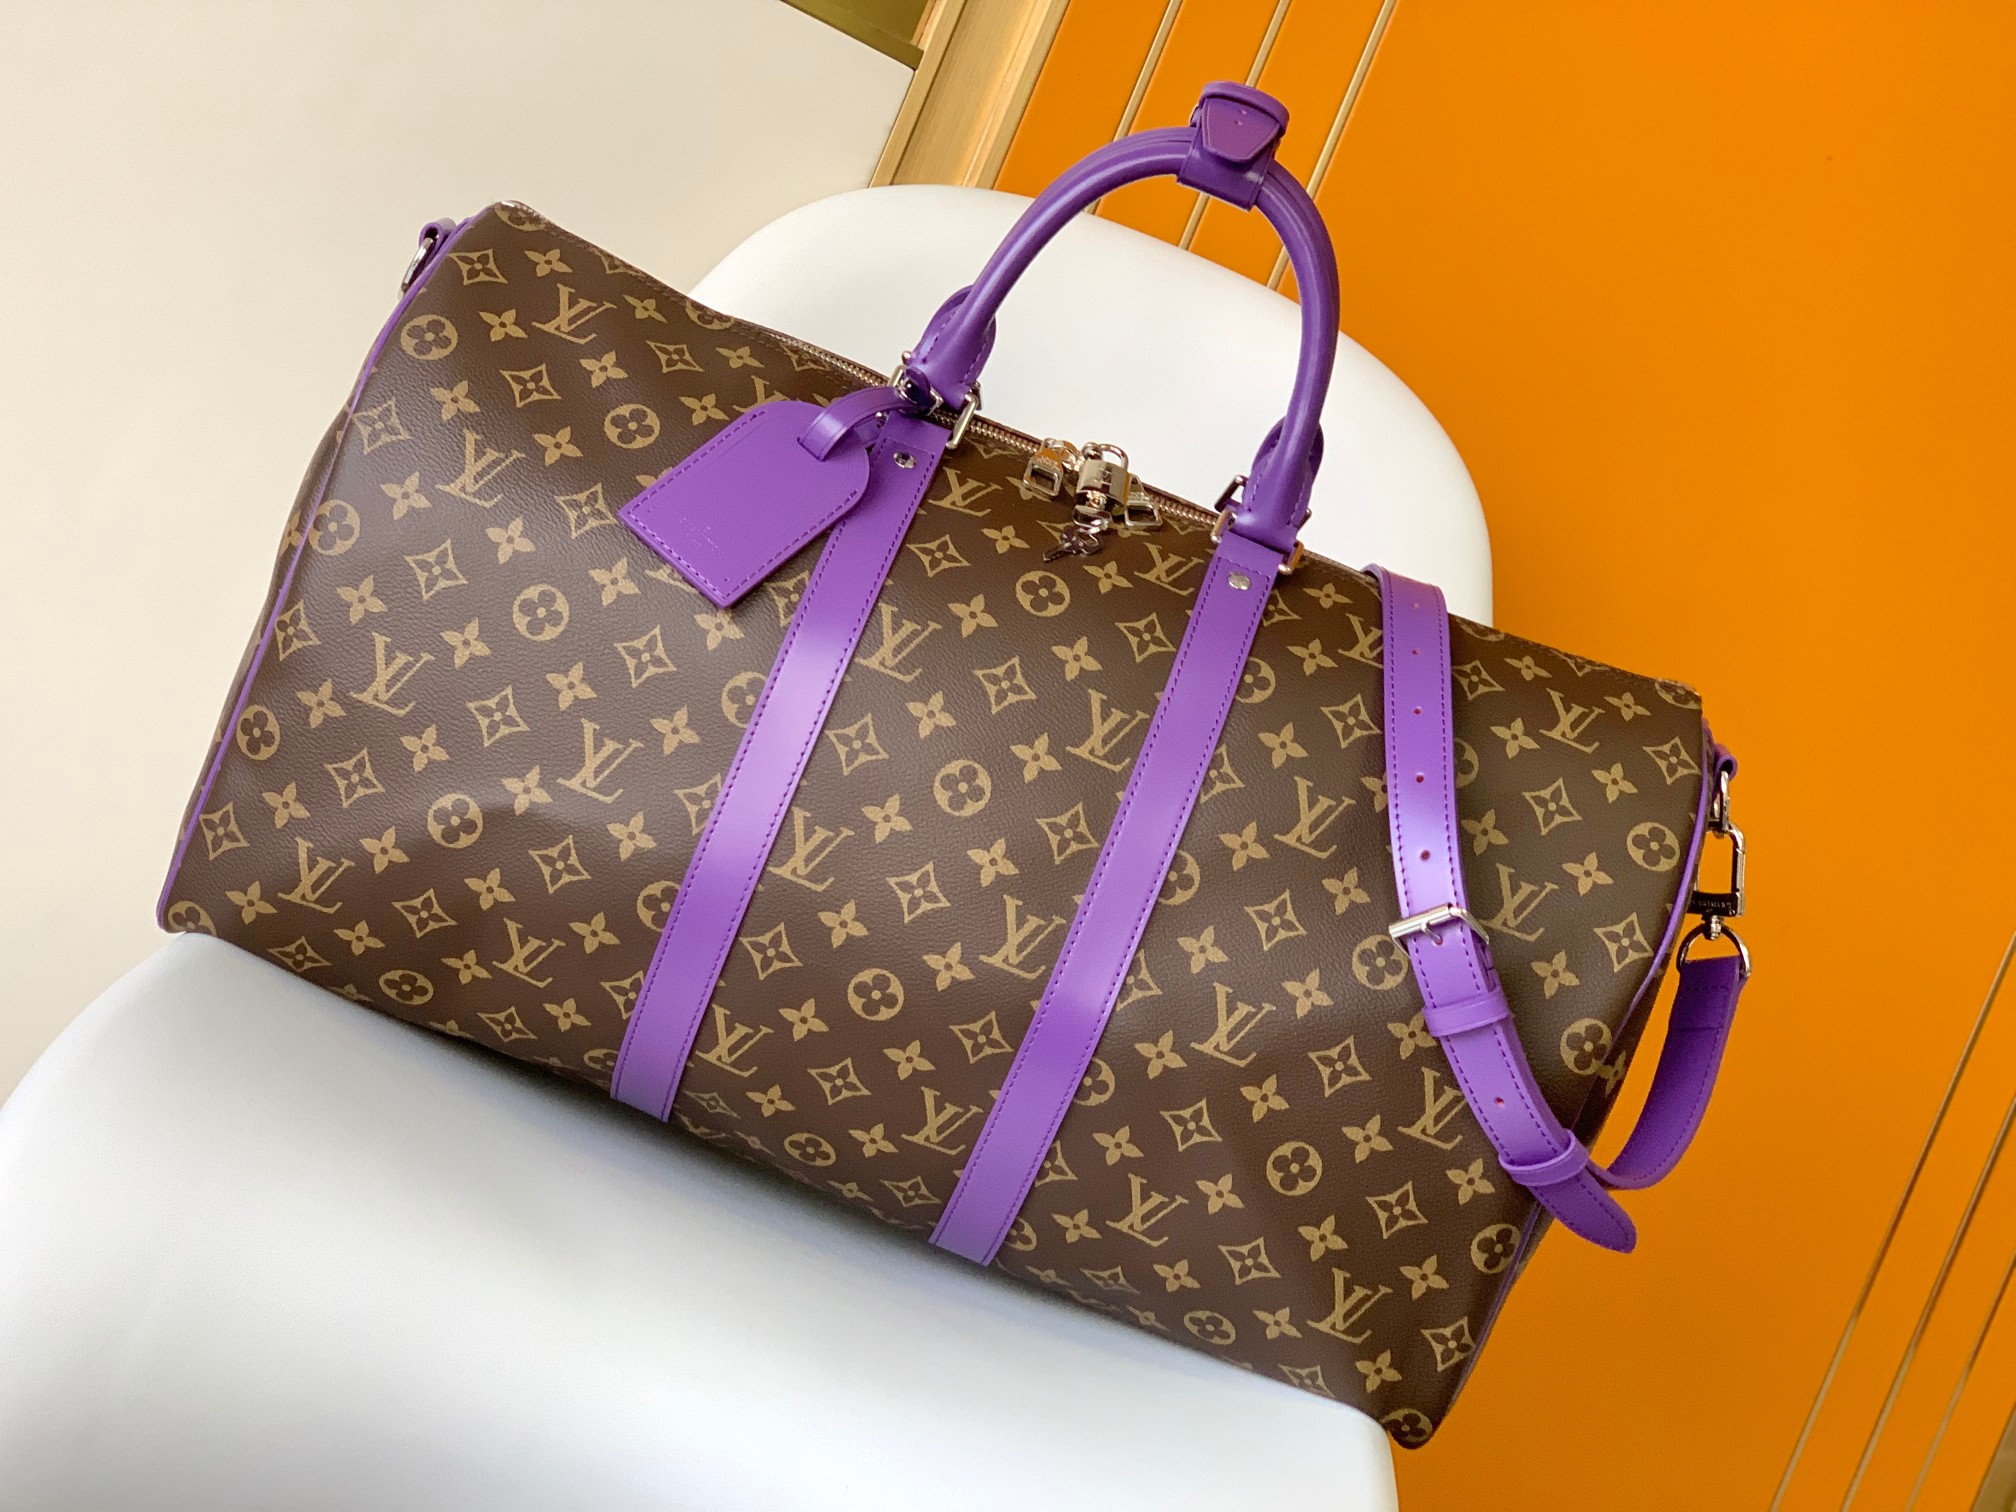 Louis Vuitton LV Keepall Travel Bags Blue Green Orange Purple Red Yellow Canvas Cowhide Fabric M46771